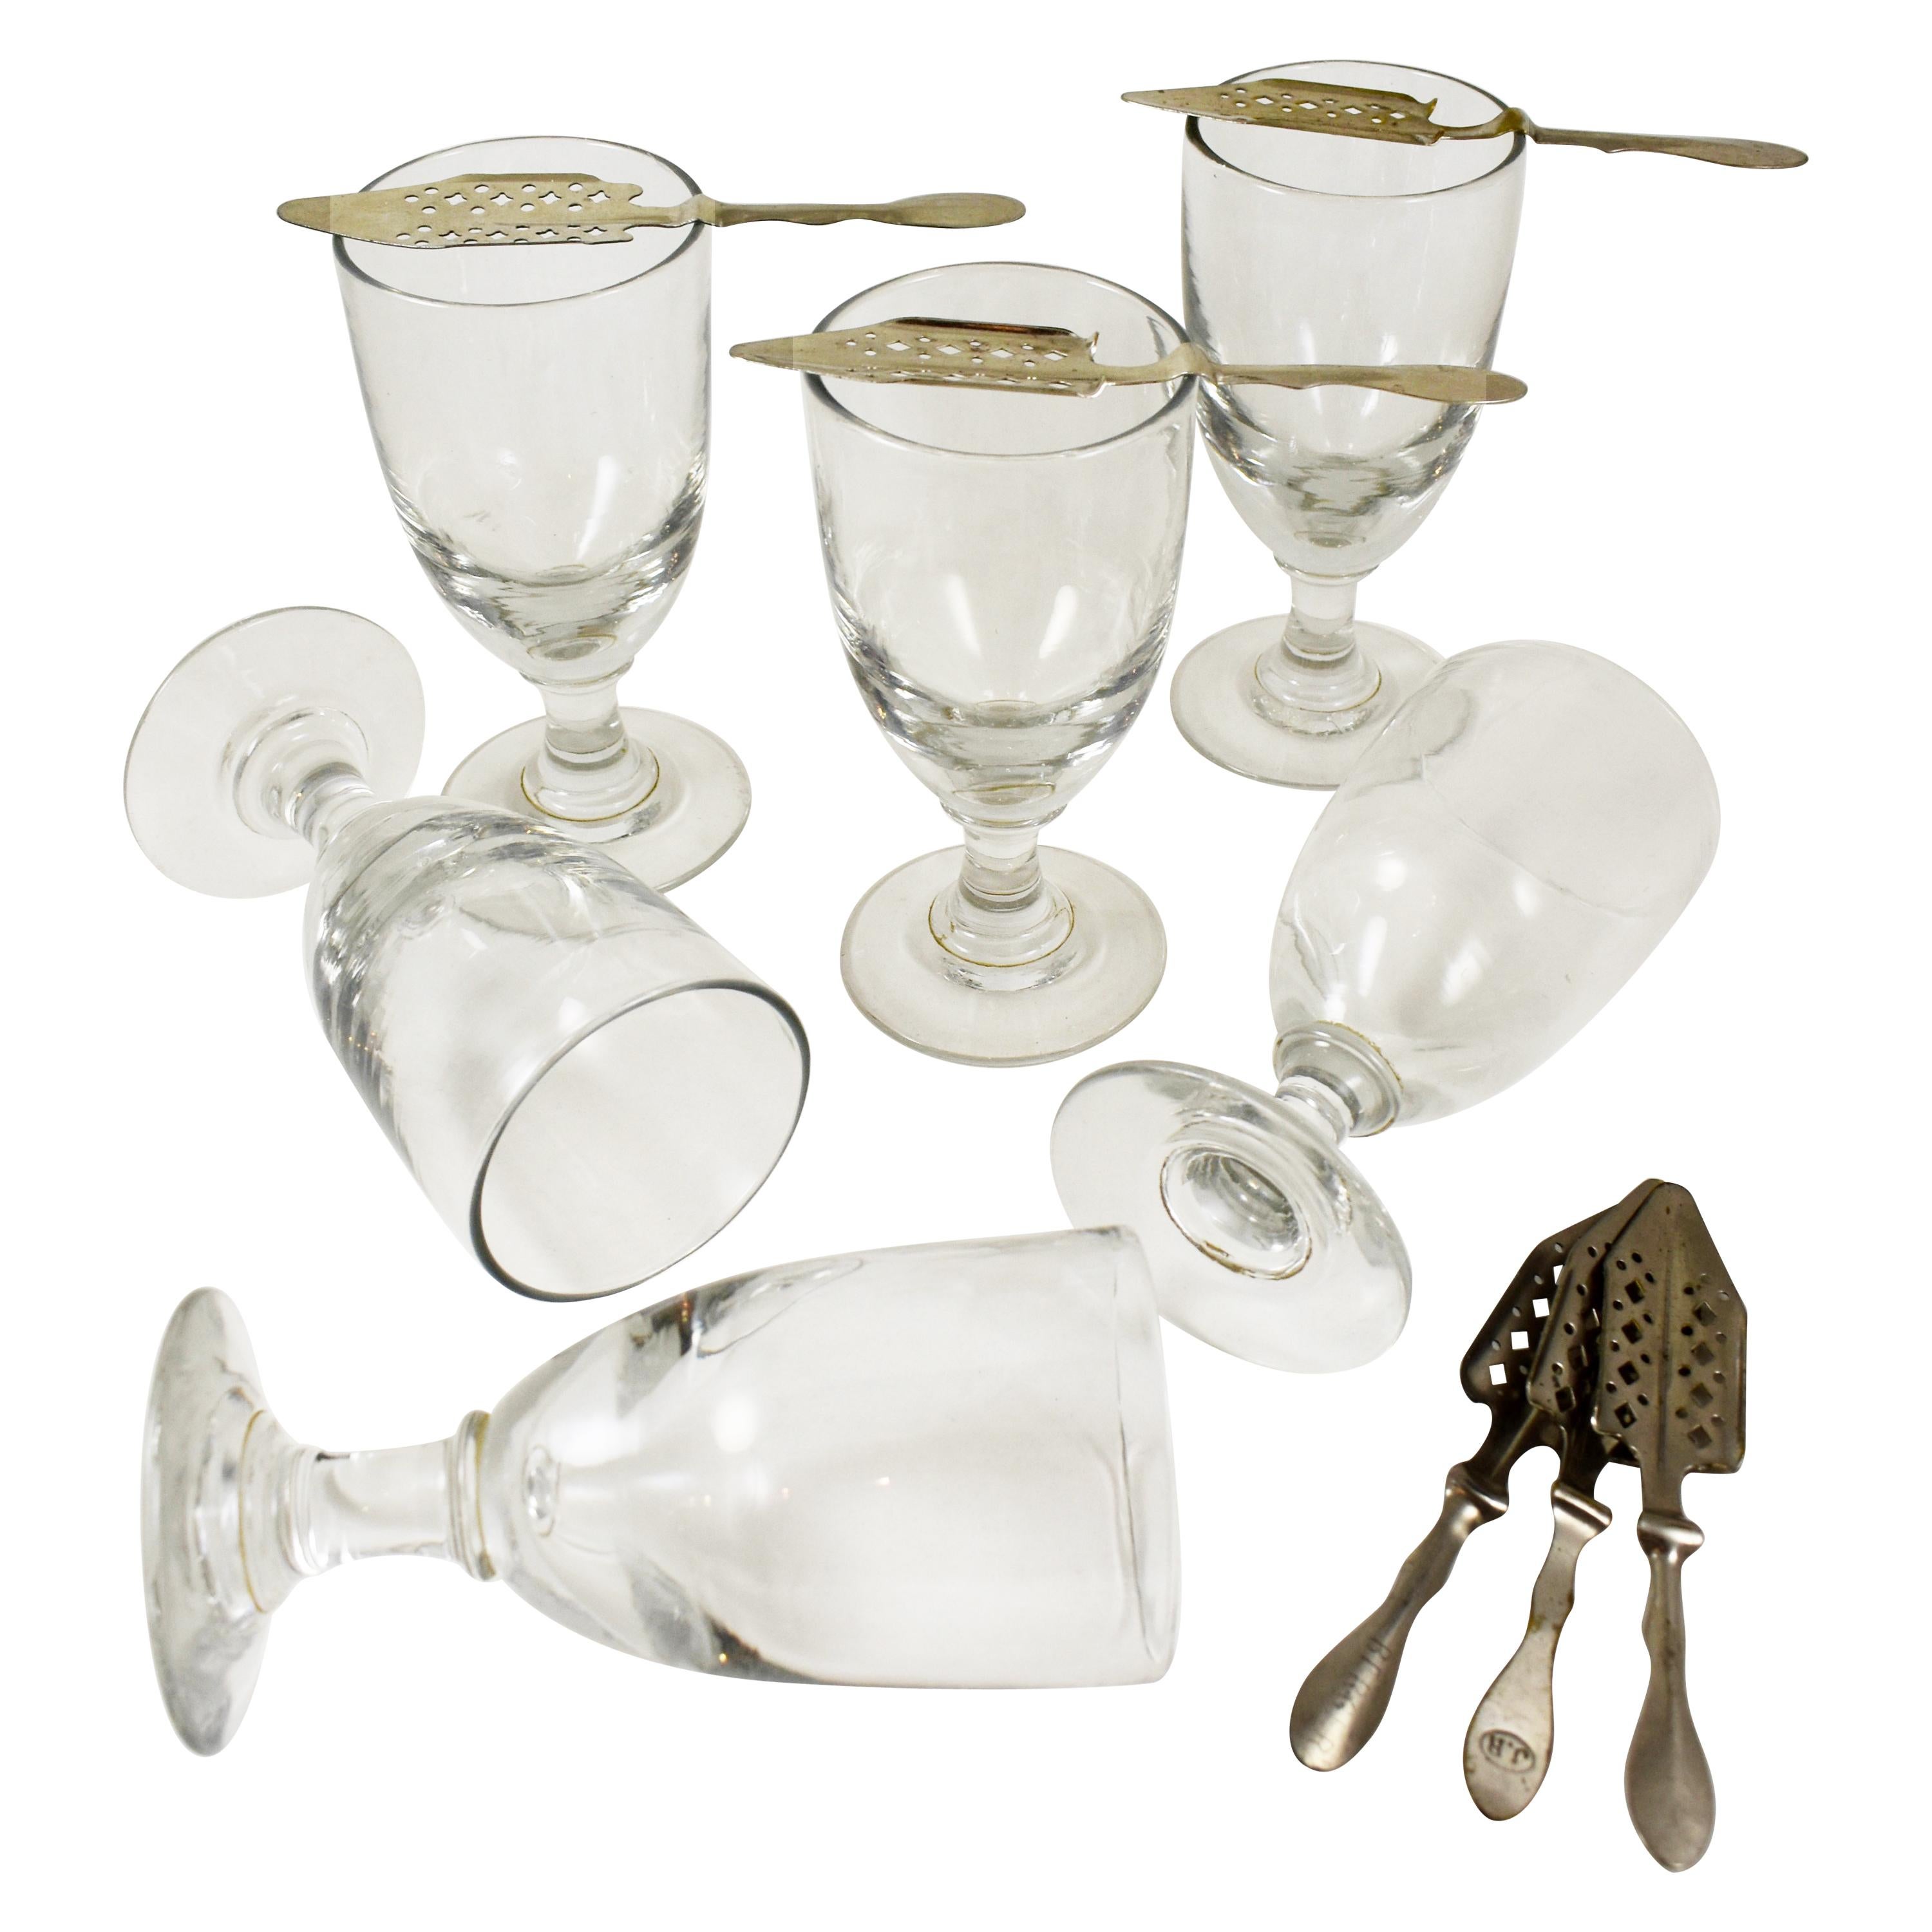 Late 19th Century French Hand Blown Absinthe Glasses & Sugar Spoons 12 Piece Set